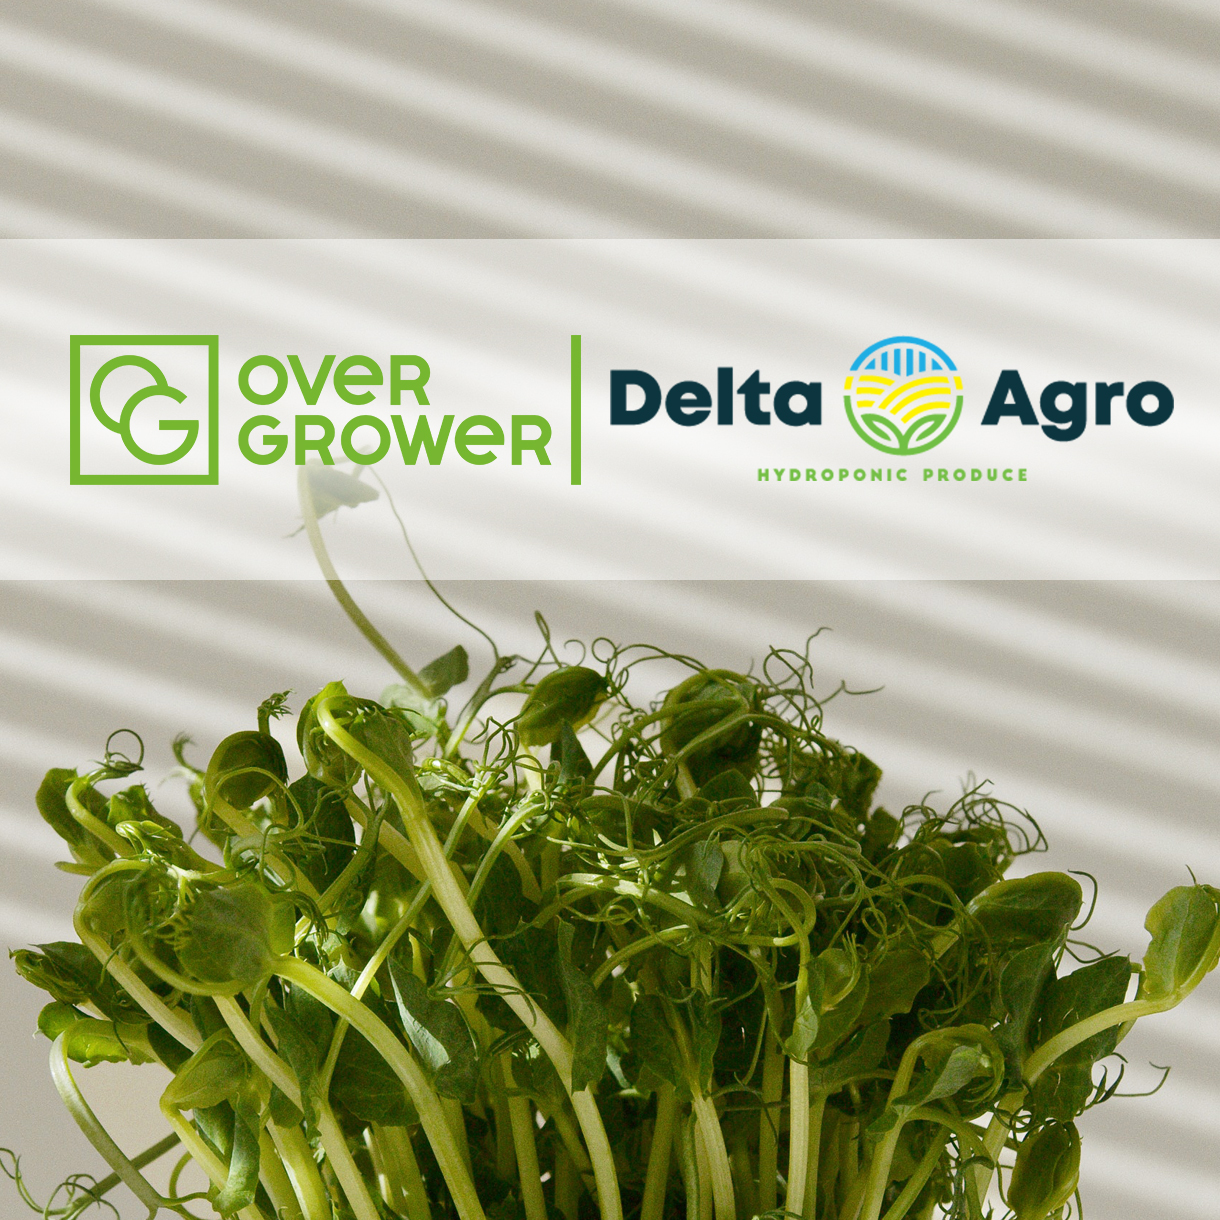 The Partnership Agreement with Delta Agroindustrial SRL executed!